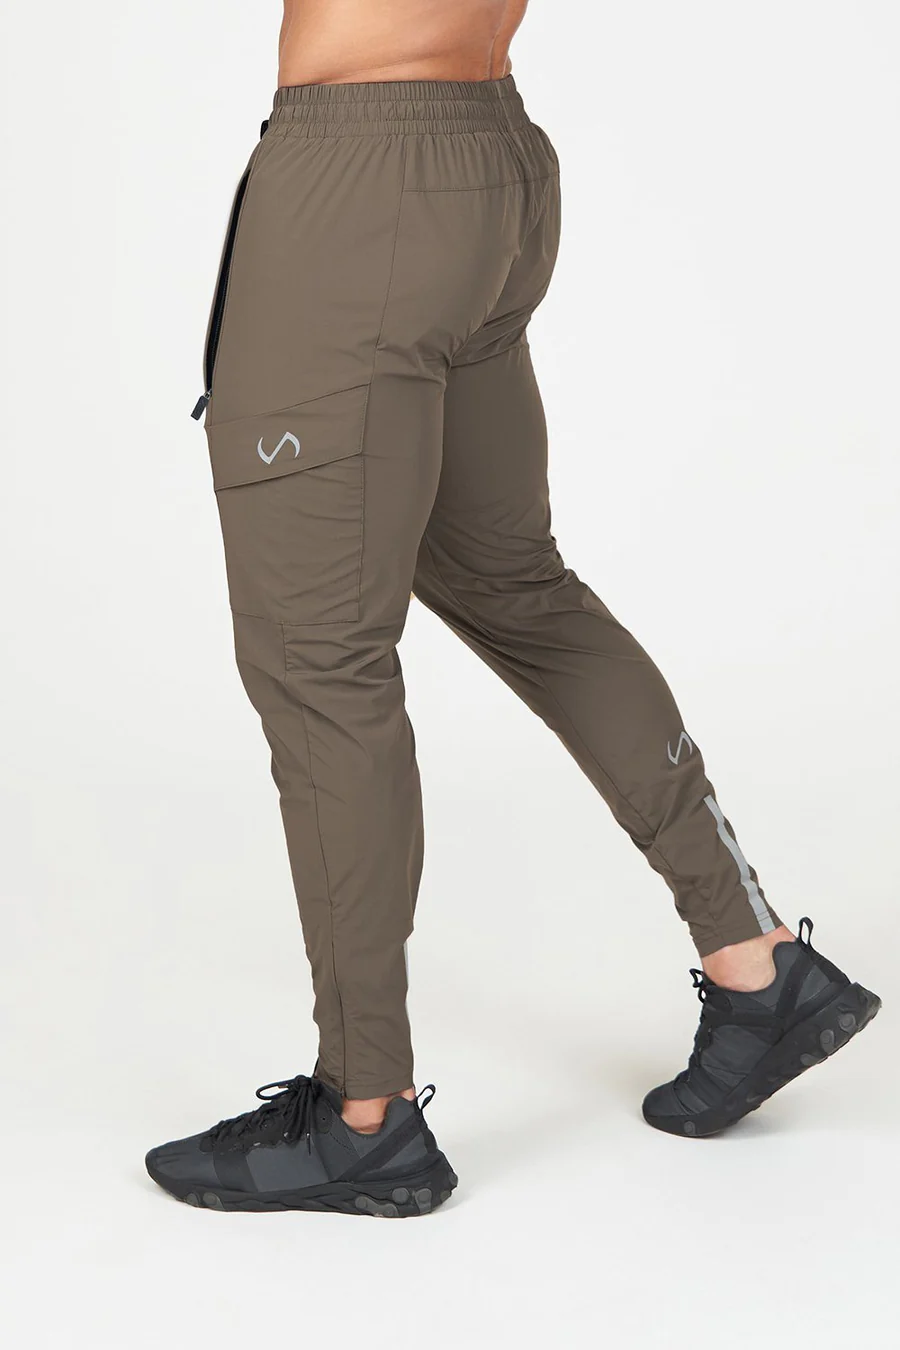 Gym Track Pant - Buy Gym Track Pant online in India